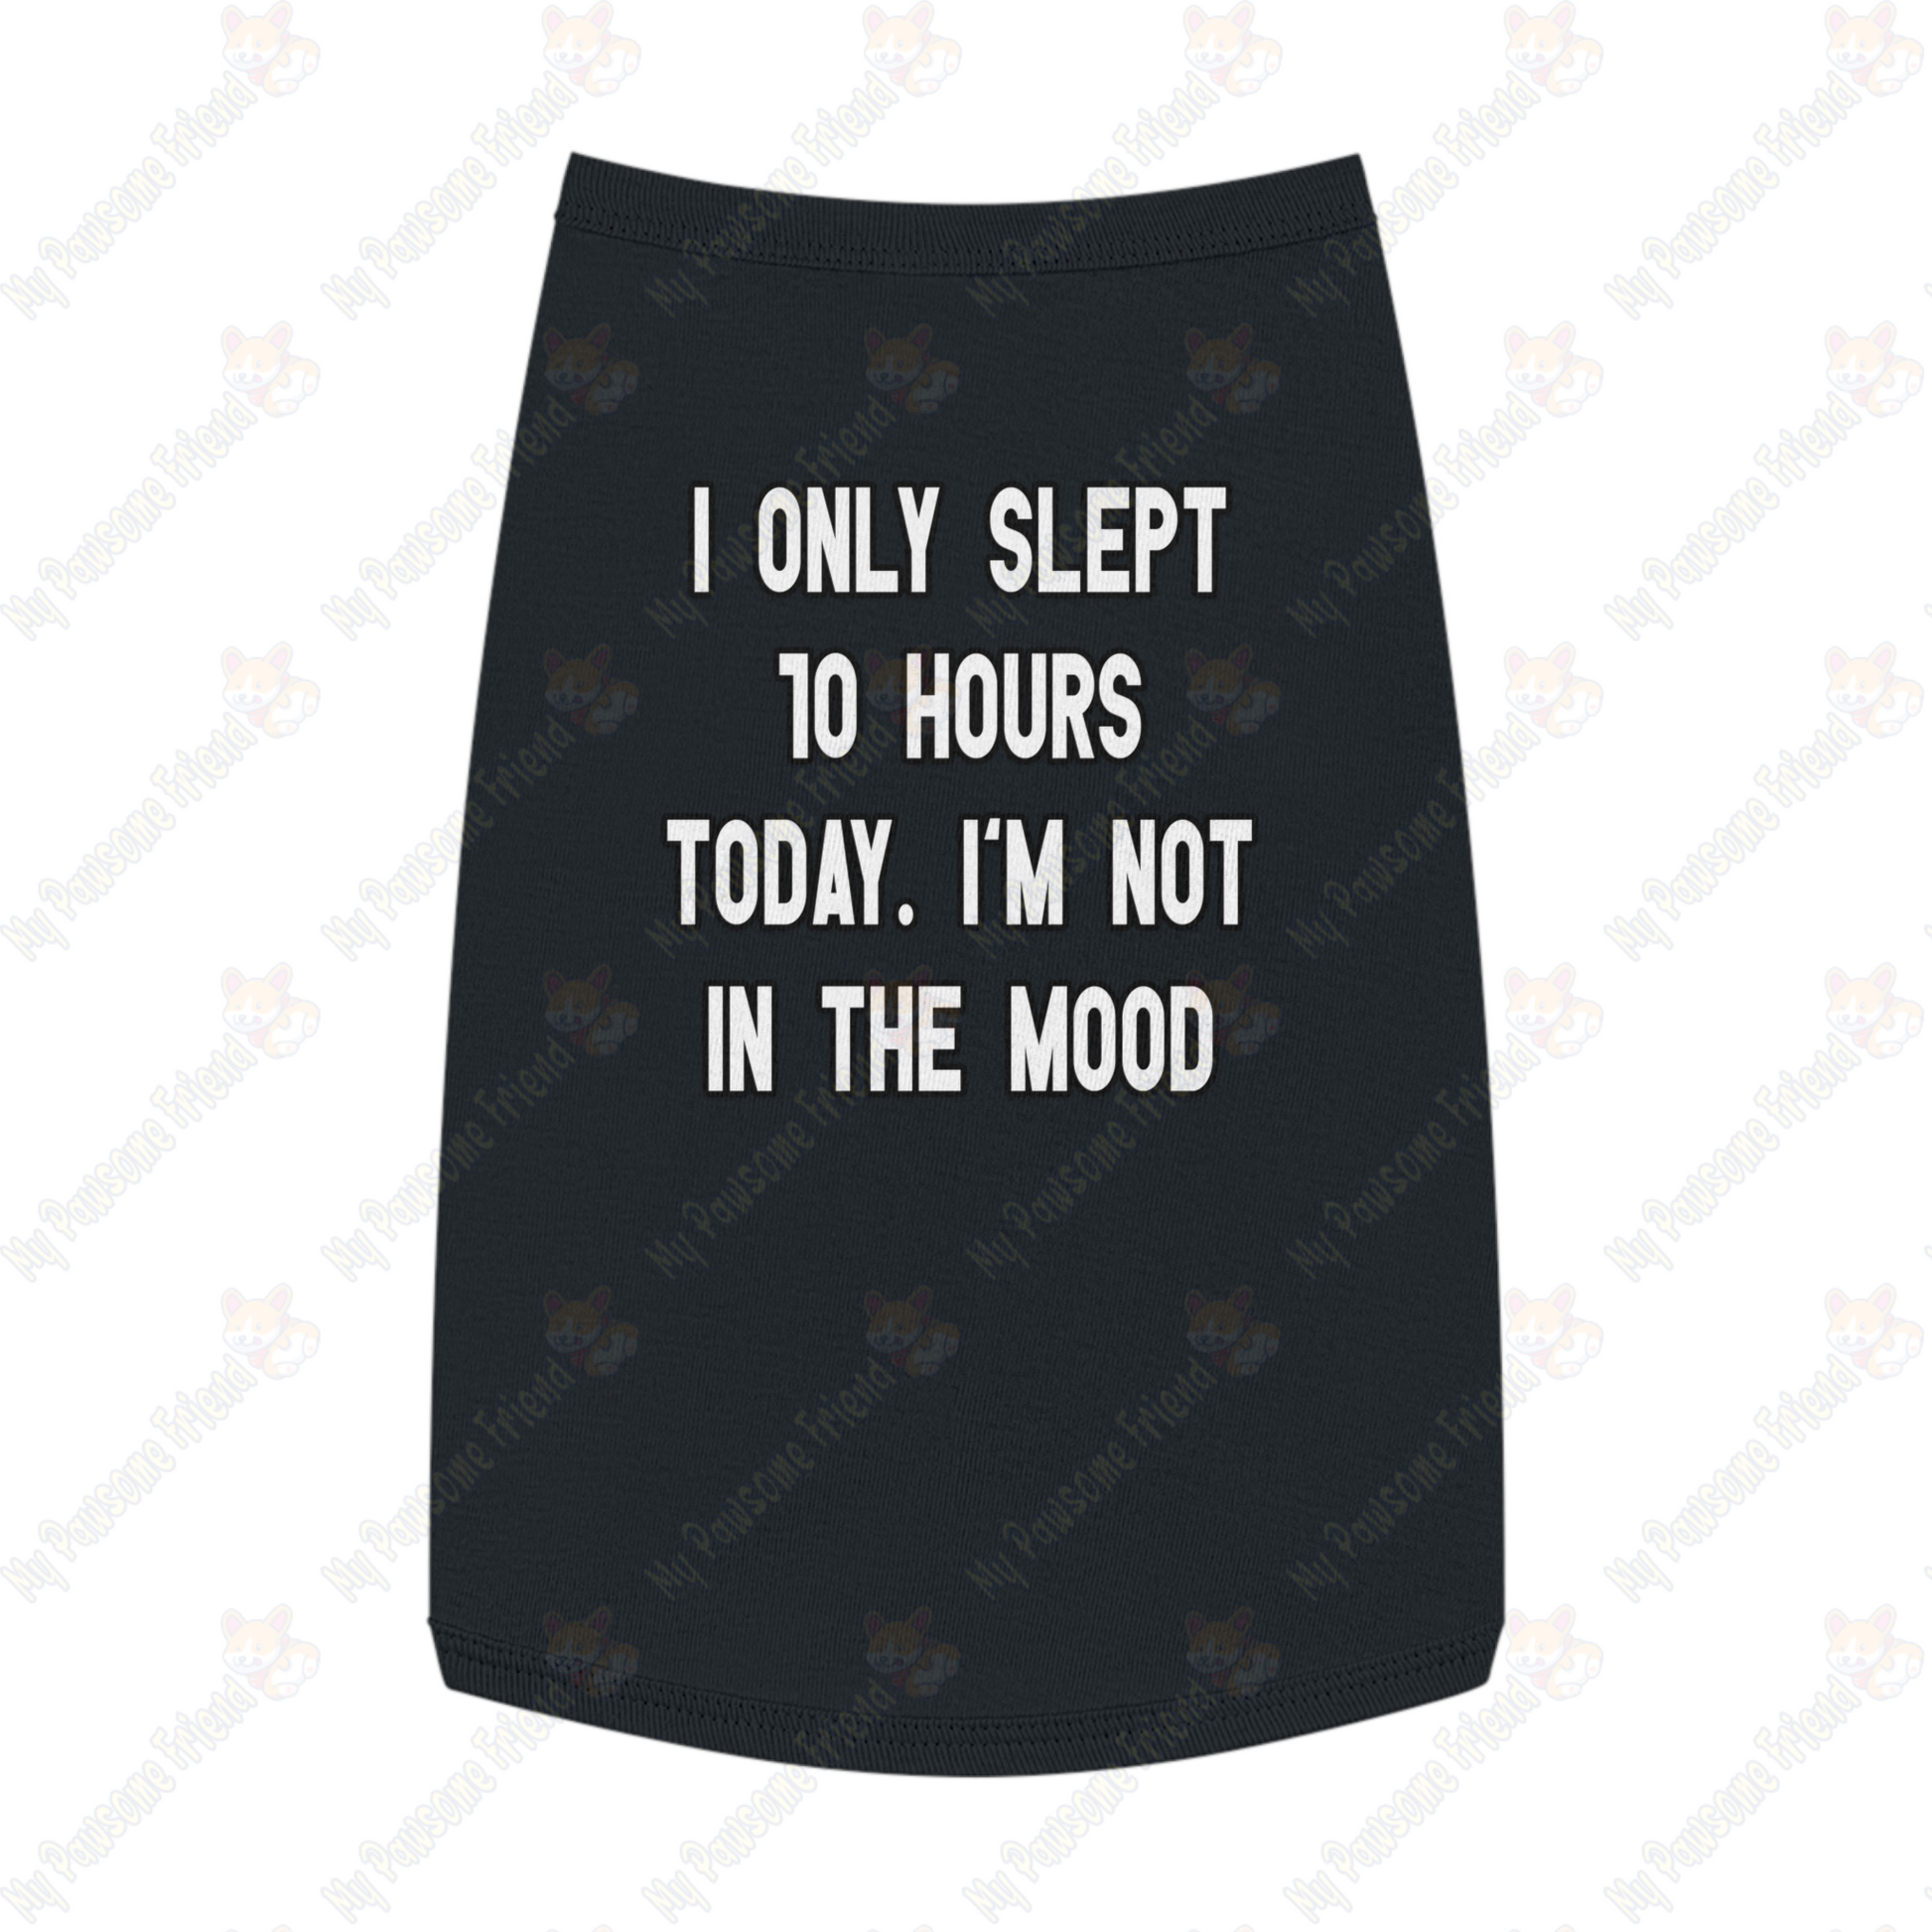 I ONLY SLEPT 10 HOURS TODAY. I'M NOT IN THE MOOD Pet Tank Top black